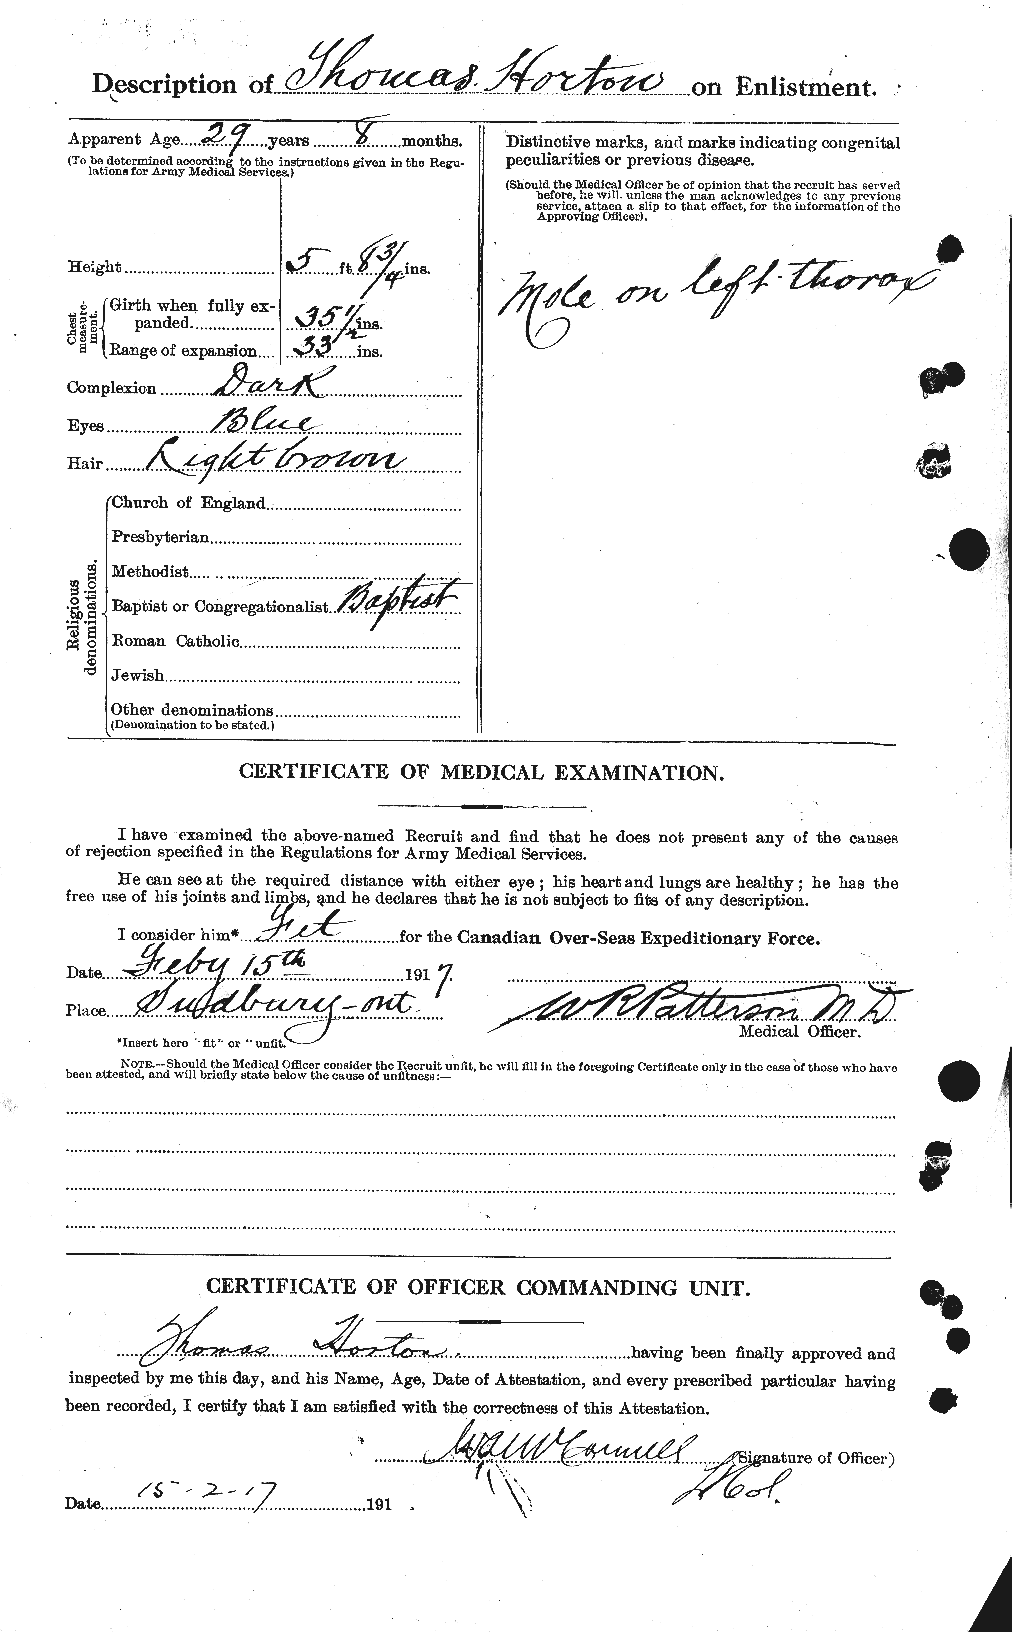 Personnel Records of the First World War - CEF 399931b